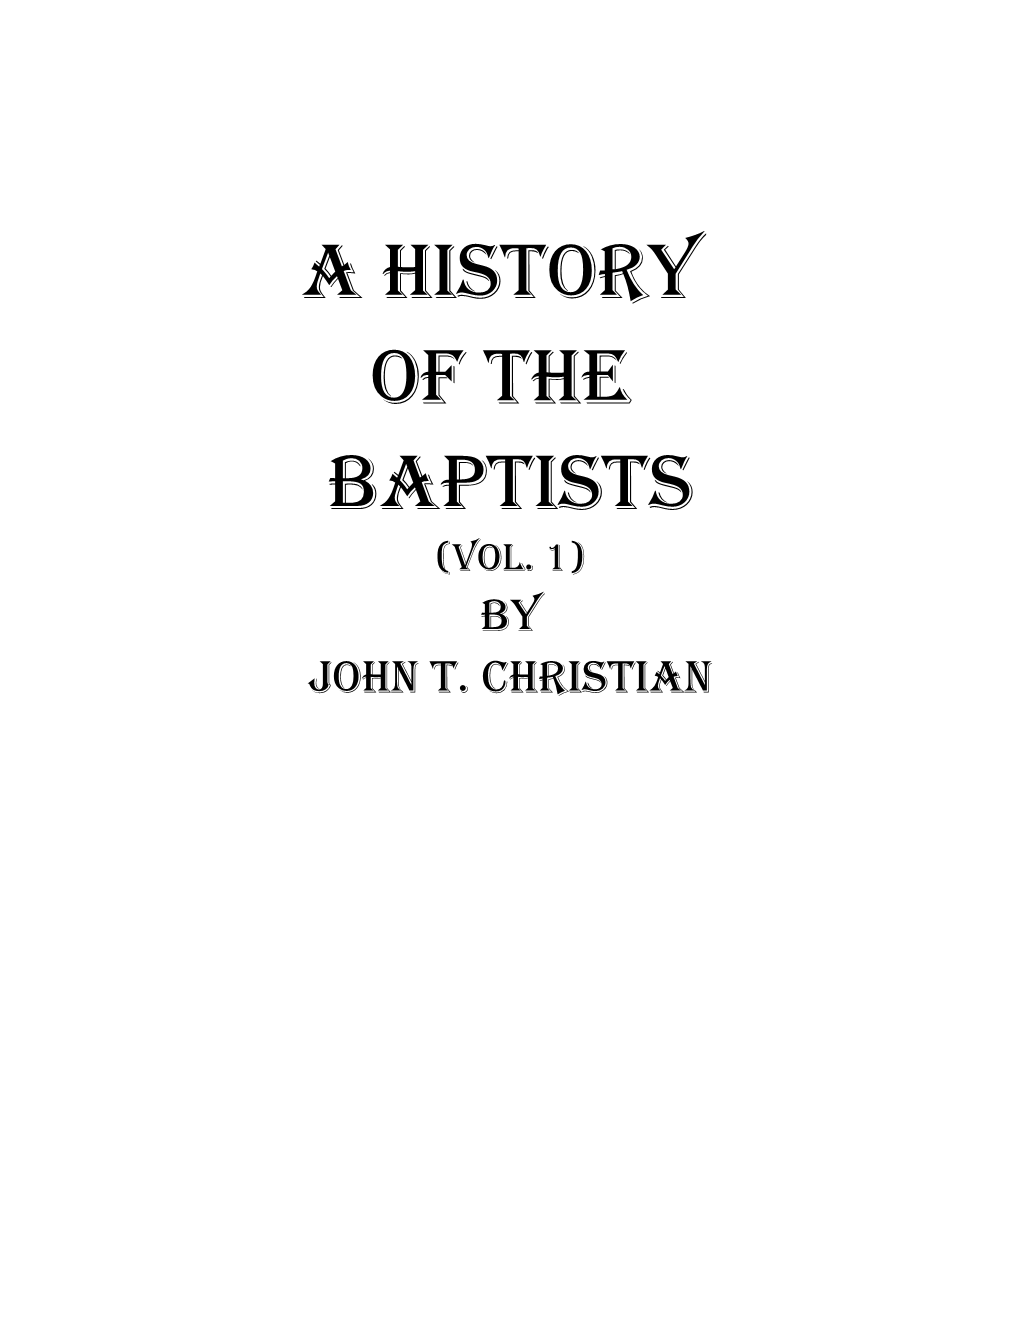 A History of the Baptists Vol 1 by John T. Christian